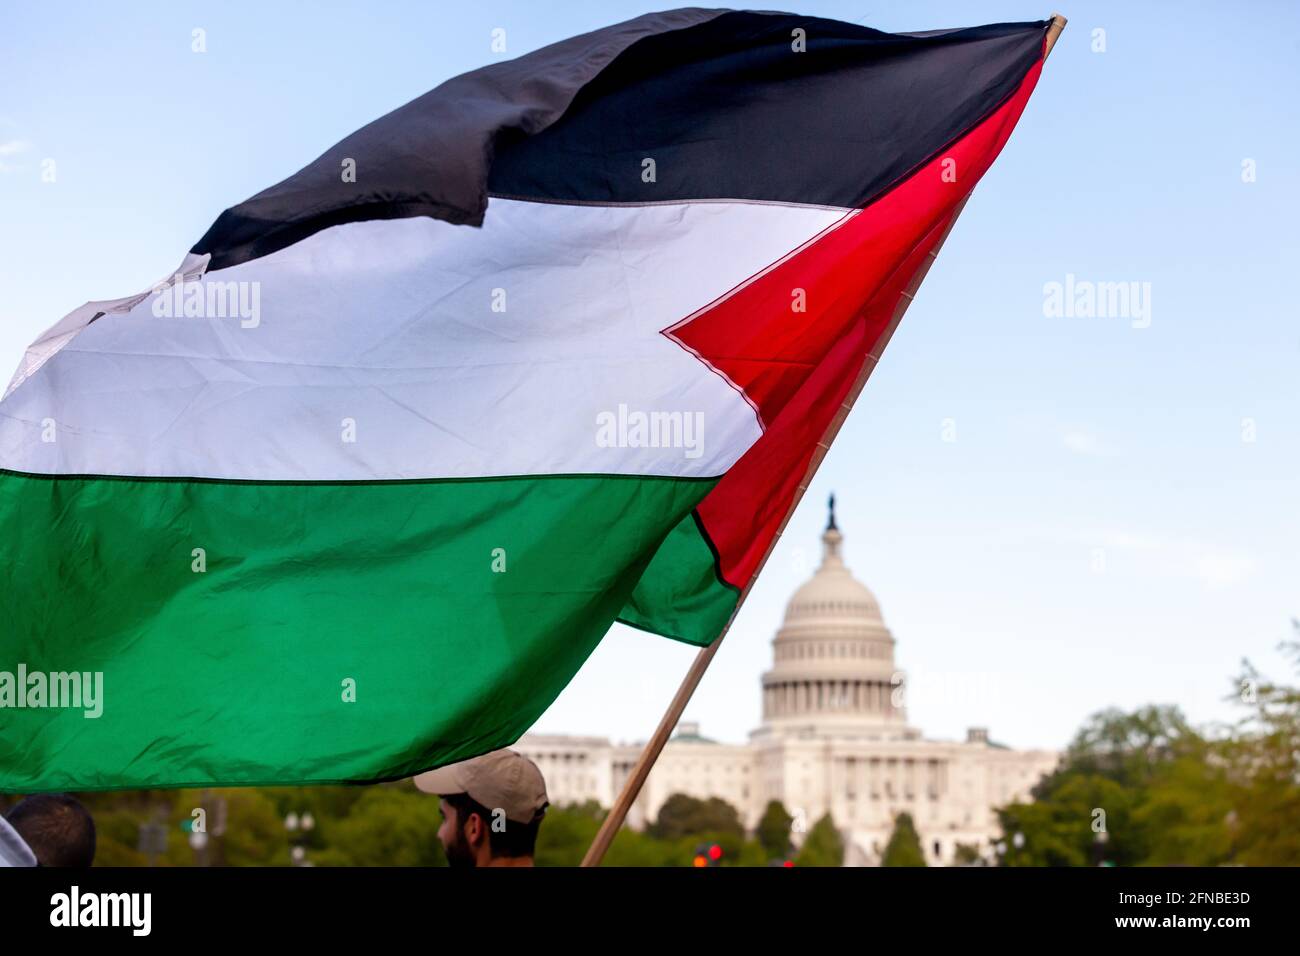 Washington, DC, USA. 15th May, 2021. Pictured: A protester in front of the crowd of over one thousand people waves a Palestinian flag as the March for Palestine approaches the United States Capitol. The protest marks on the 73rd anniversary of the Nakba, Israel's seizure of Palestine in 1948. The date takes on greater significance this year as a result of Israel's invasion of Al Aqua mosque in Jerusalem and airstrikes in Gaza. Credit: Allison Bailey/Alamy Live News Stock Photo